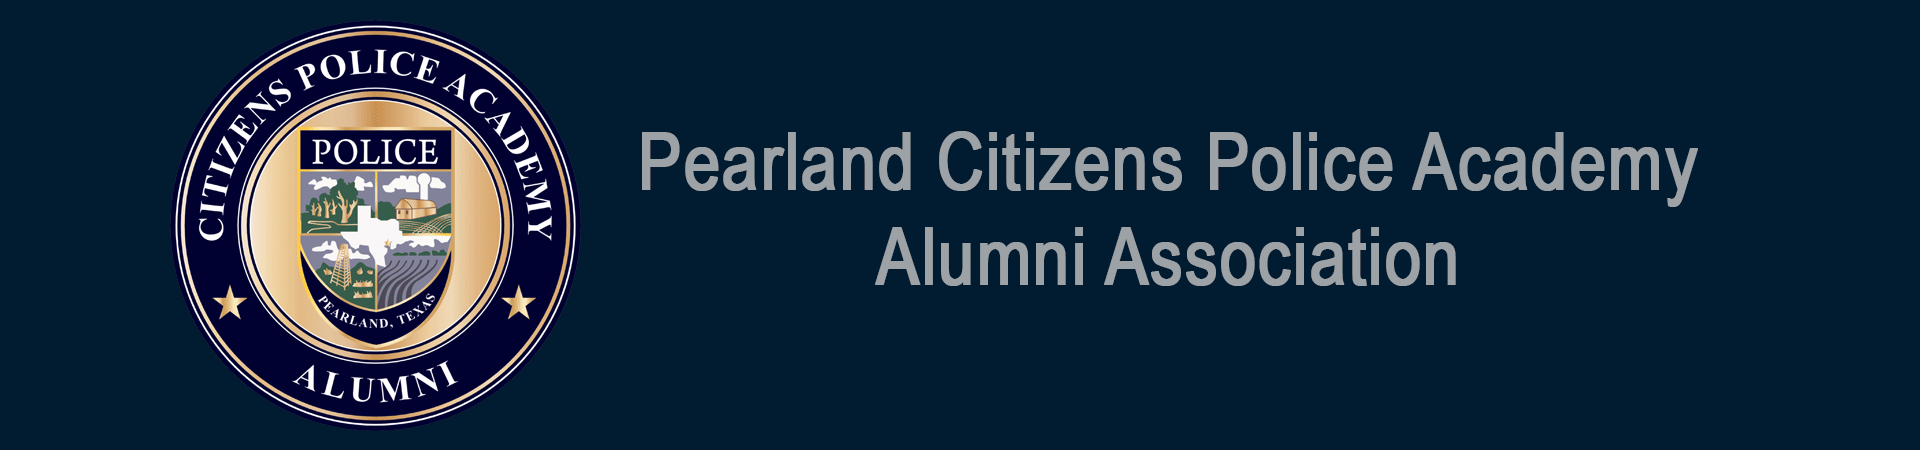 Pearland Citizens Police Academy Alumni Association